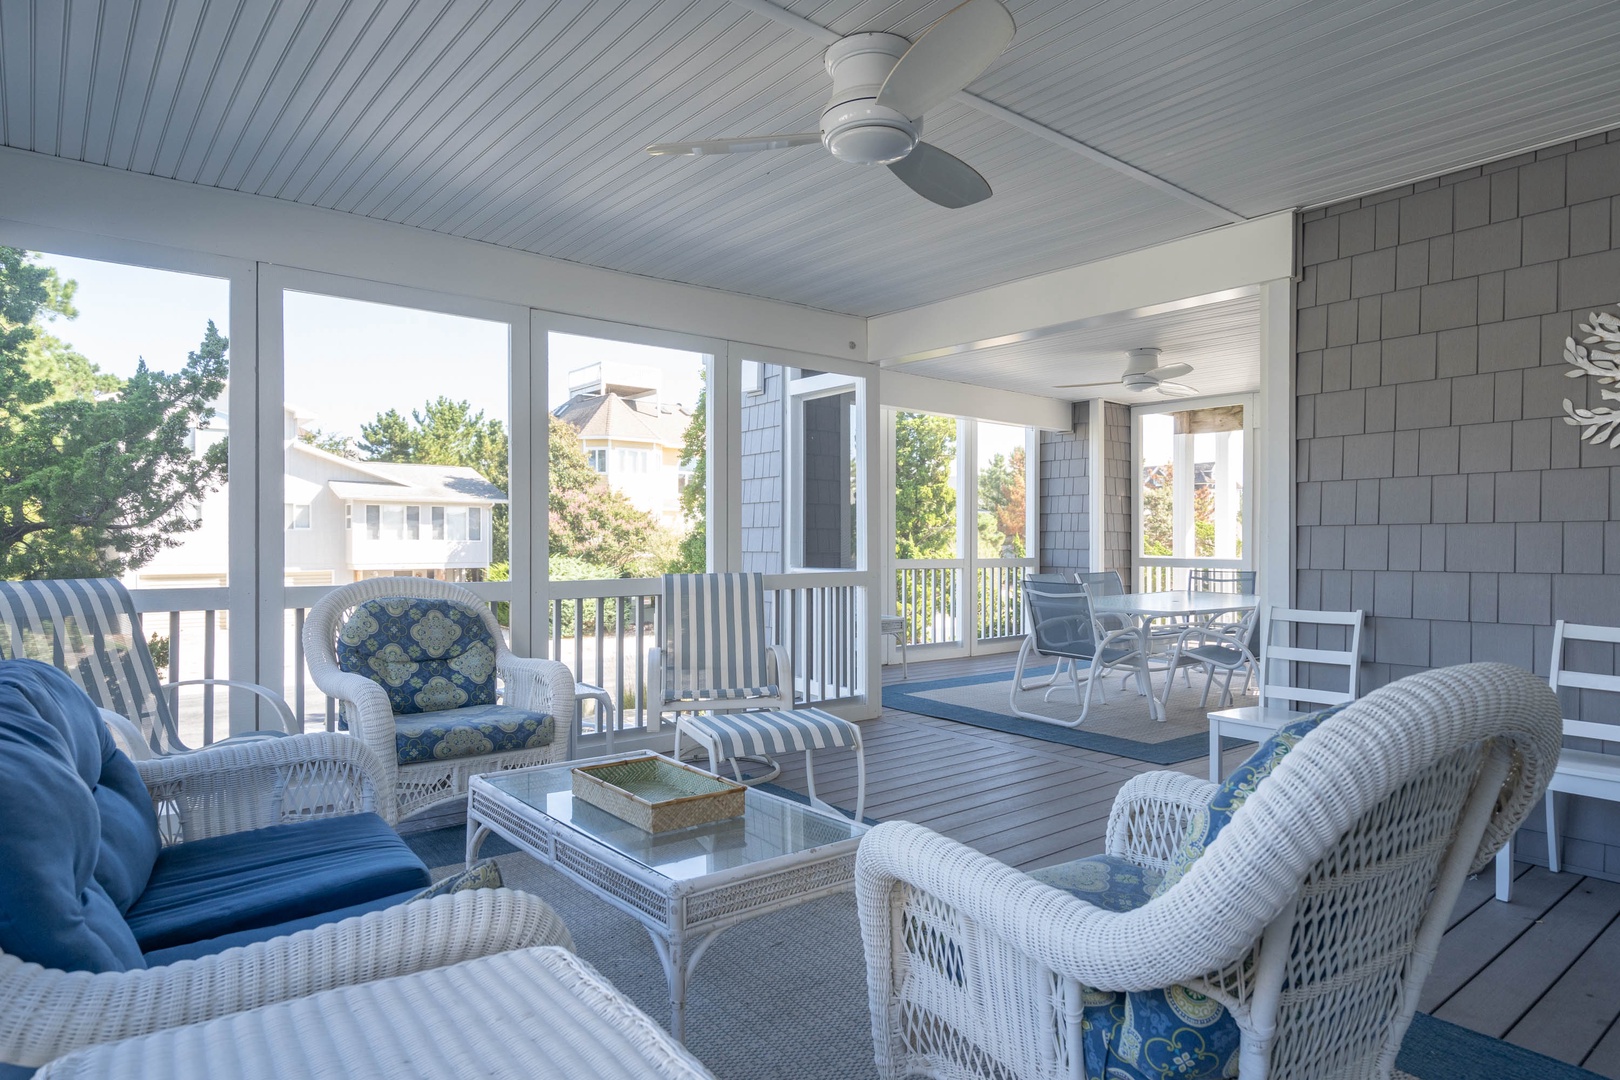 Take in the fresh air or curl up with a book on the Covered Porch